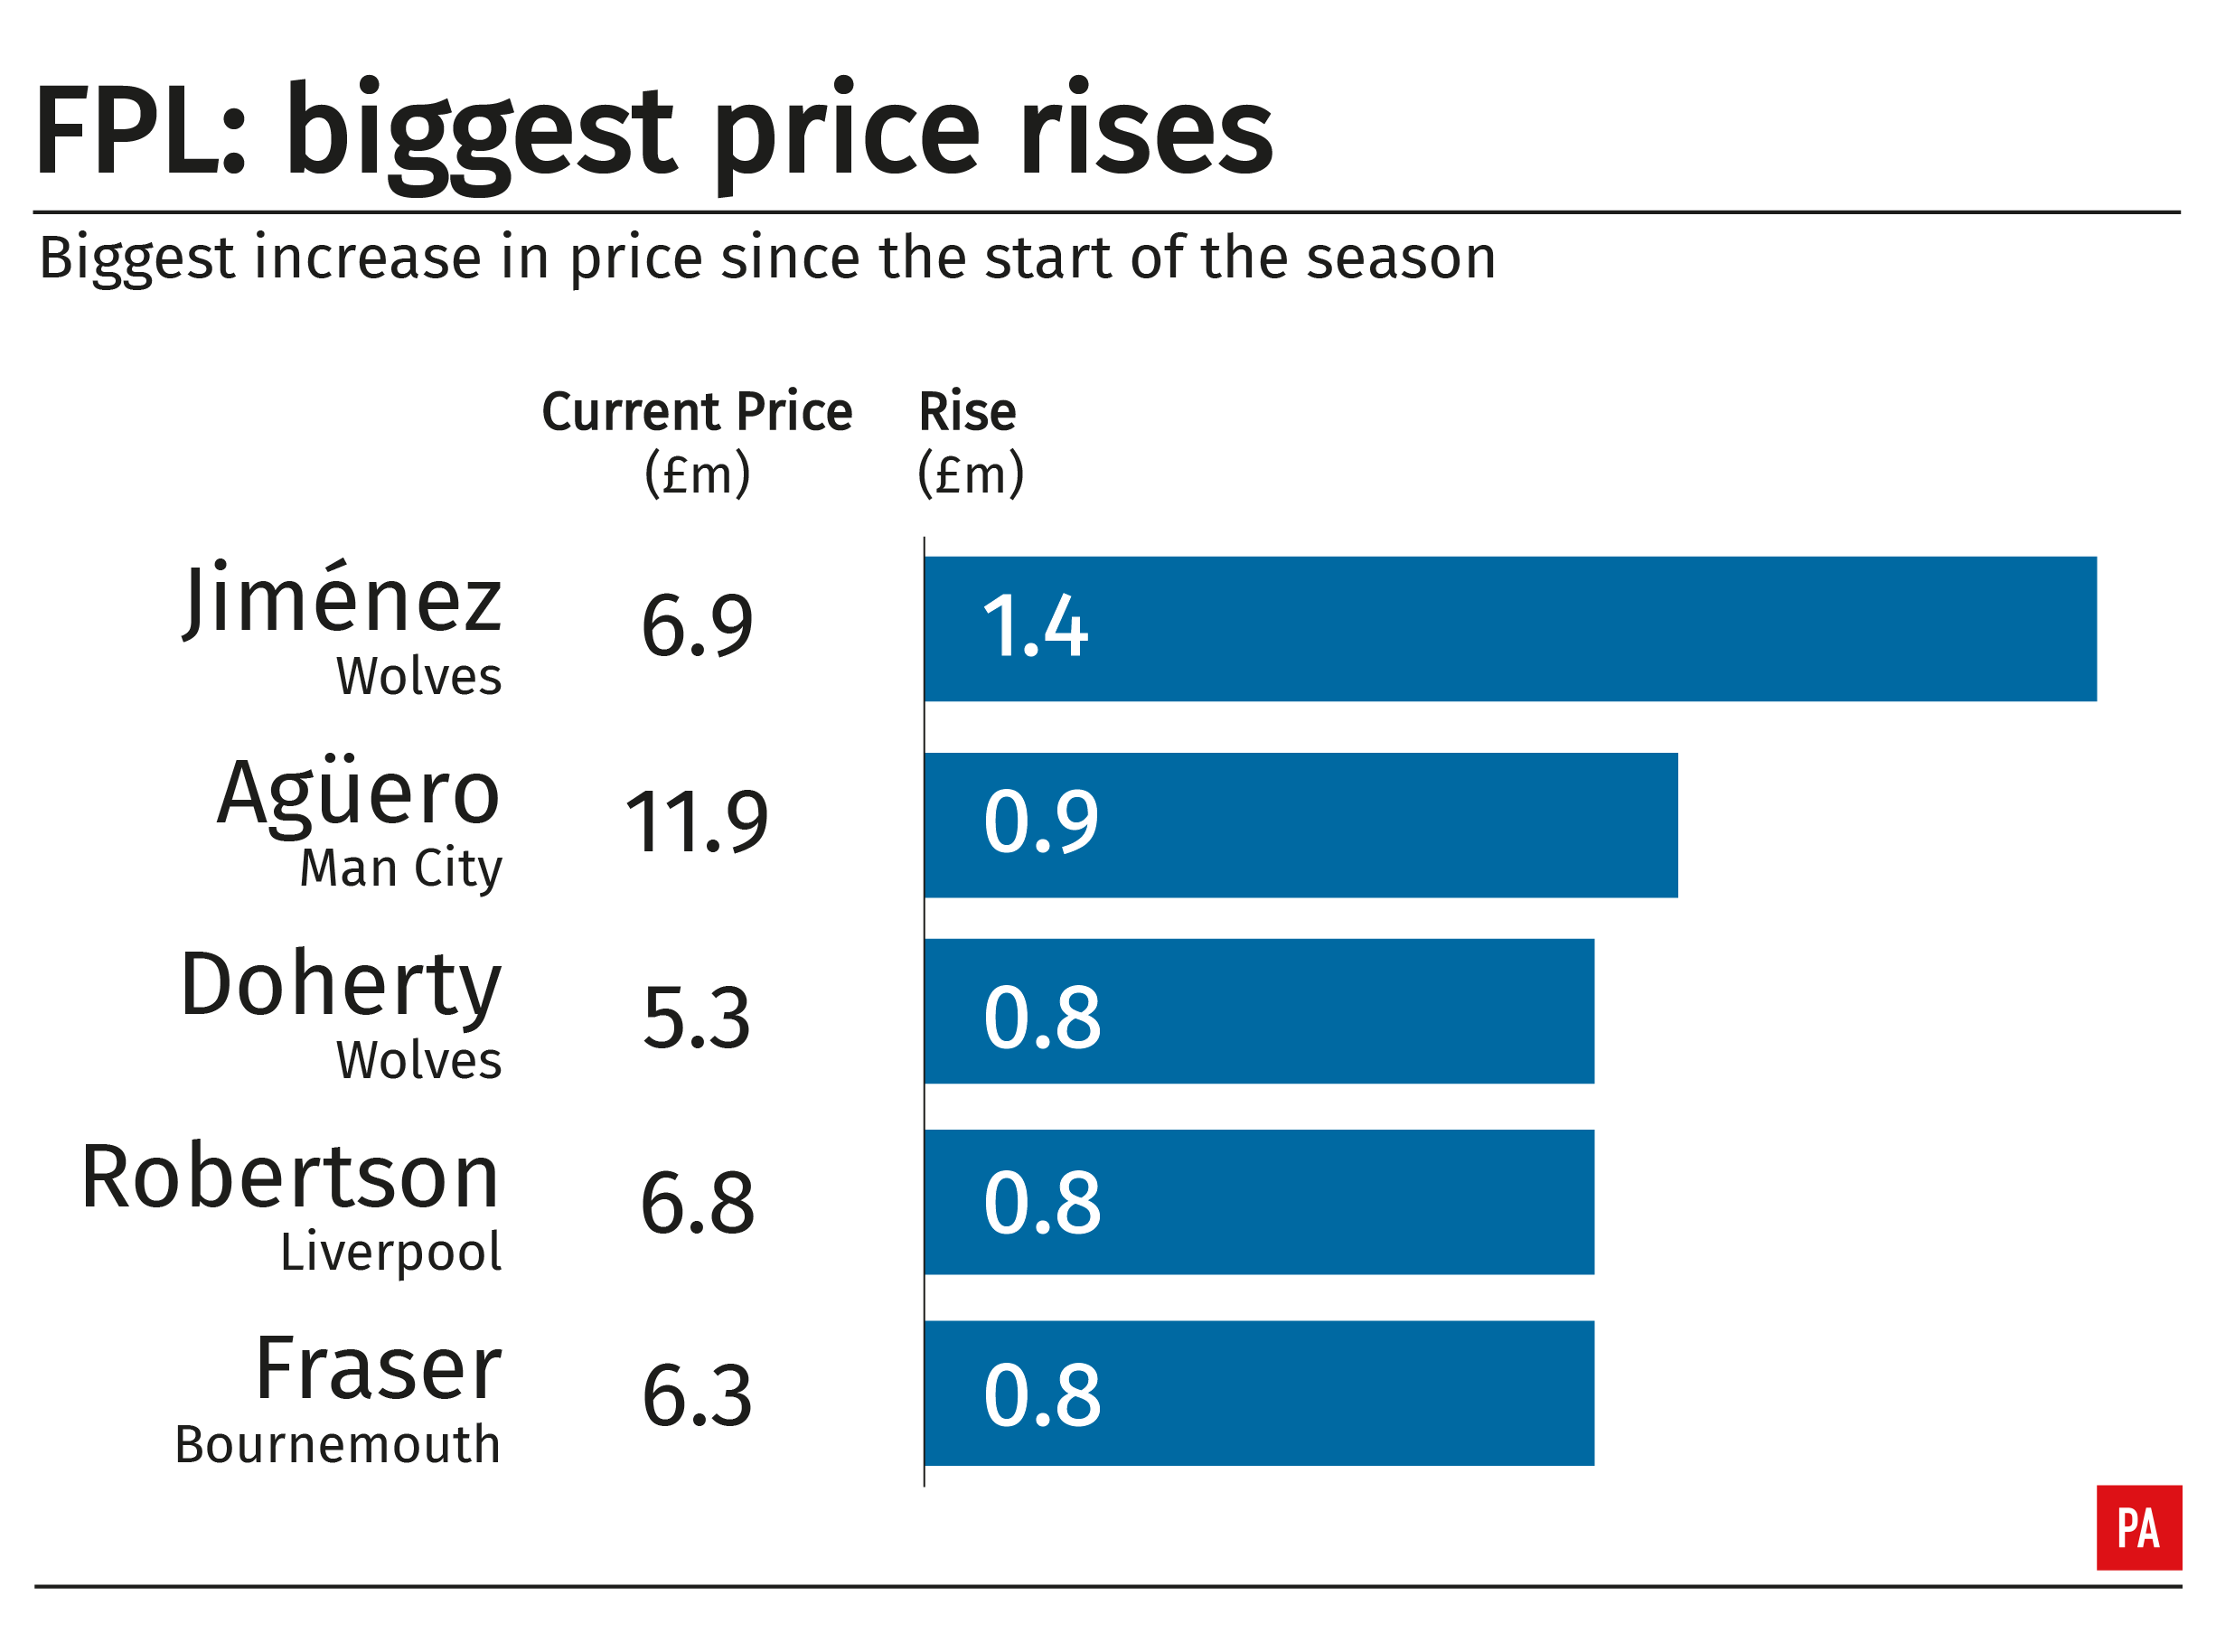 A table showing the biggest price rises for footballers in the Fantasy Premier League in the 2018/19 season